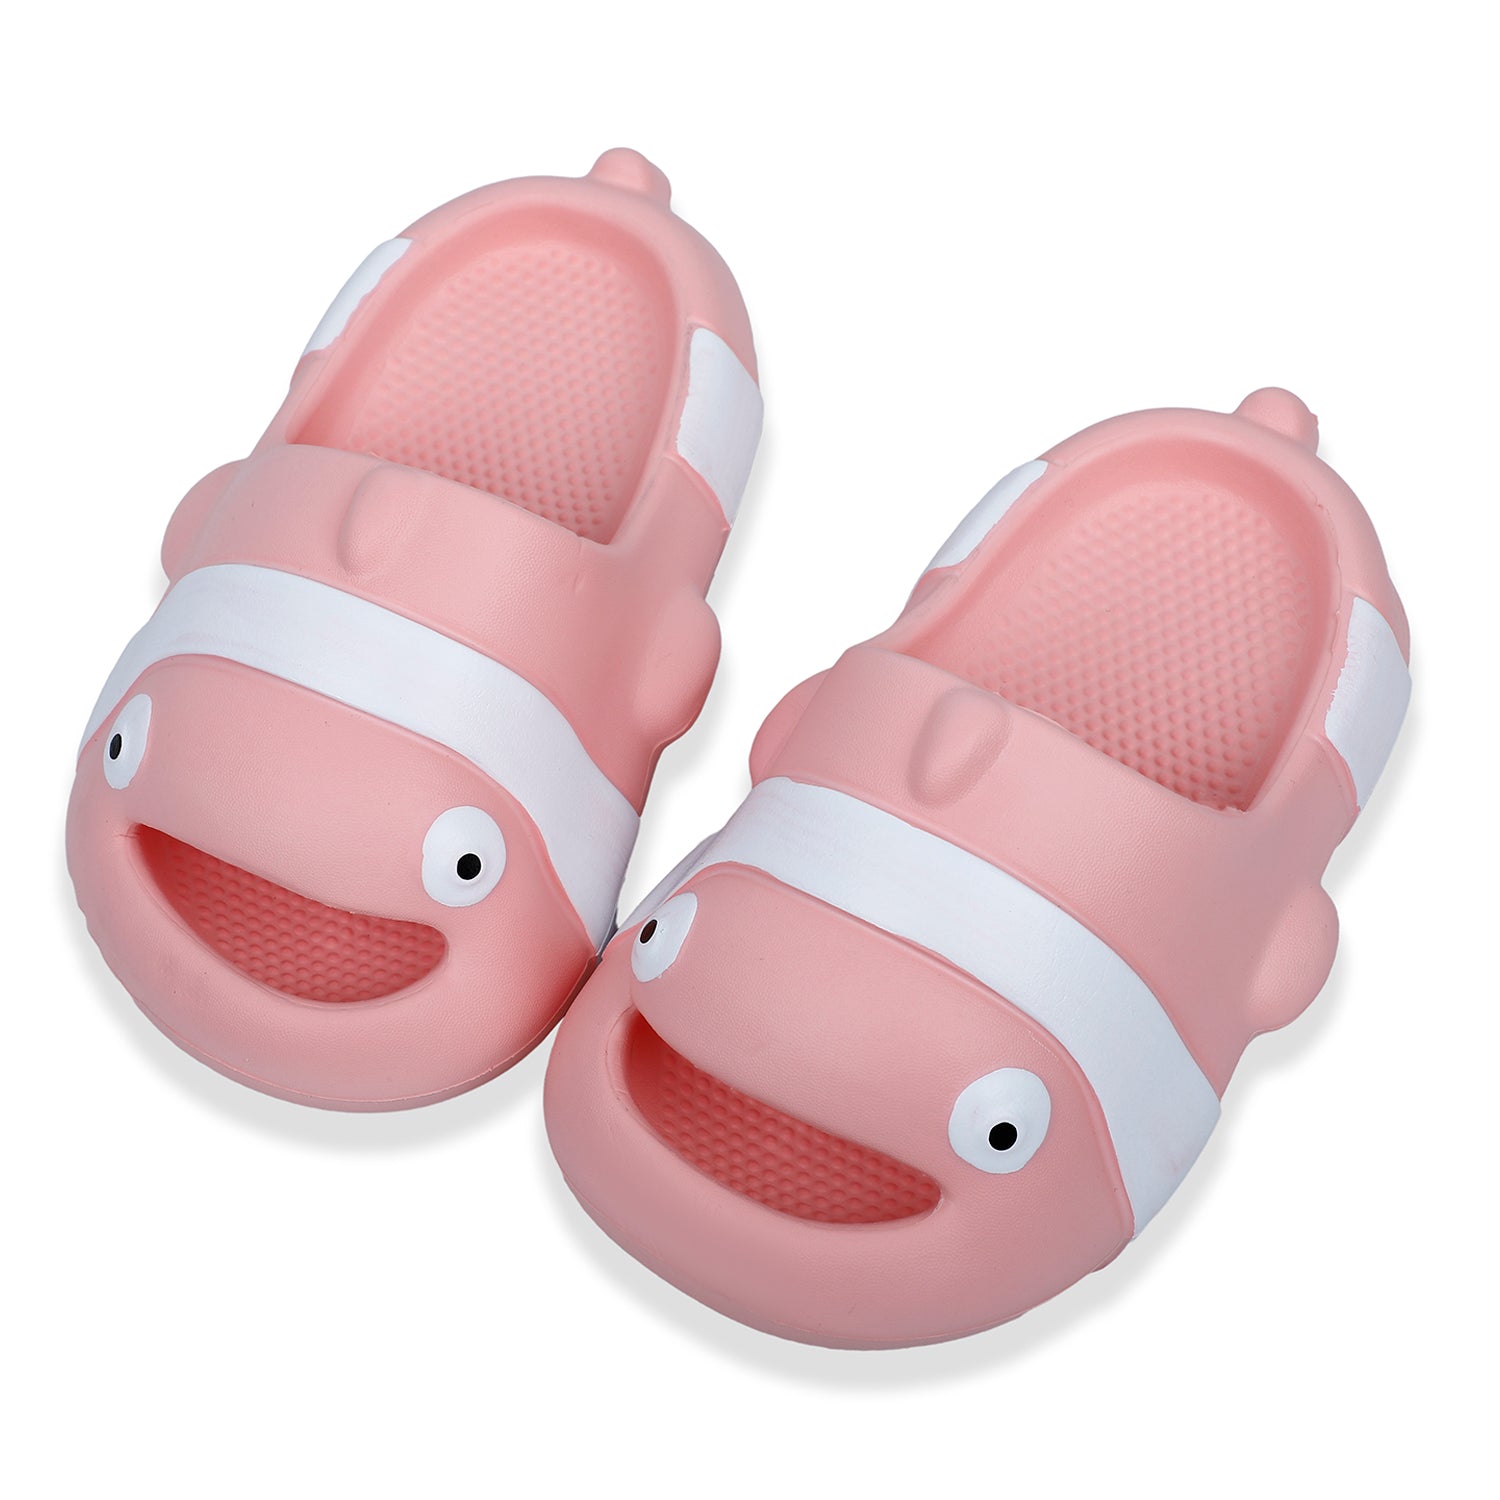 Crocs Clogs Water Shoes Sandals Baby Toddler Kids Waterproof Rubber Size 4  5 | eBay